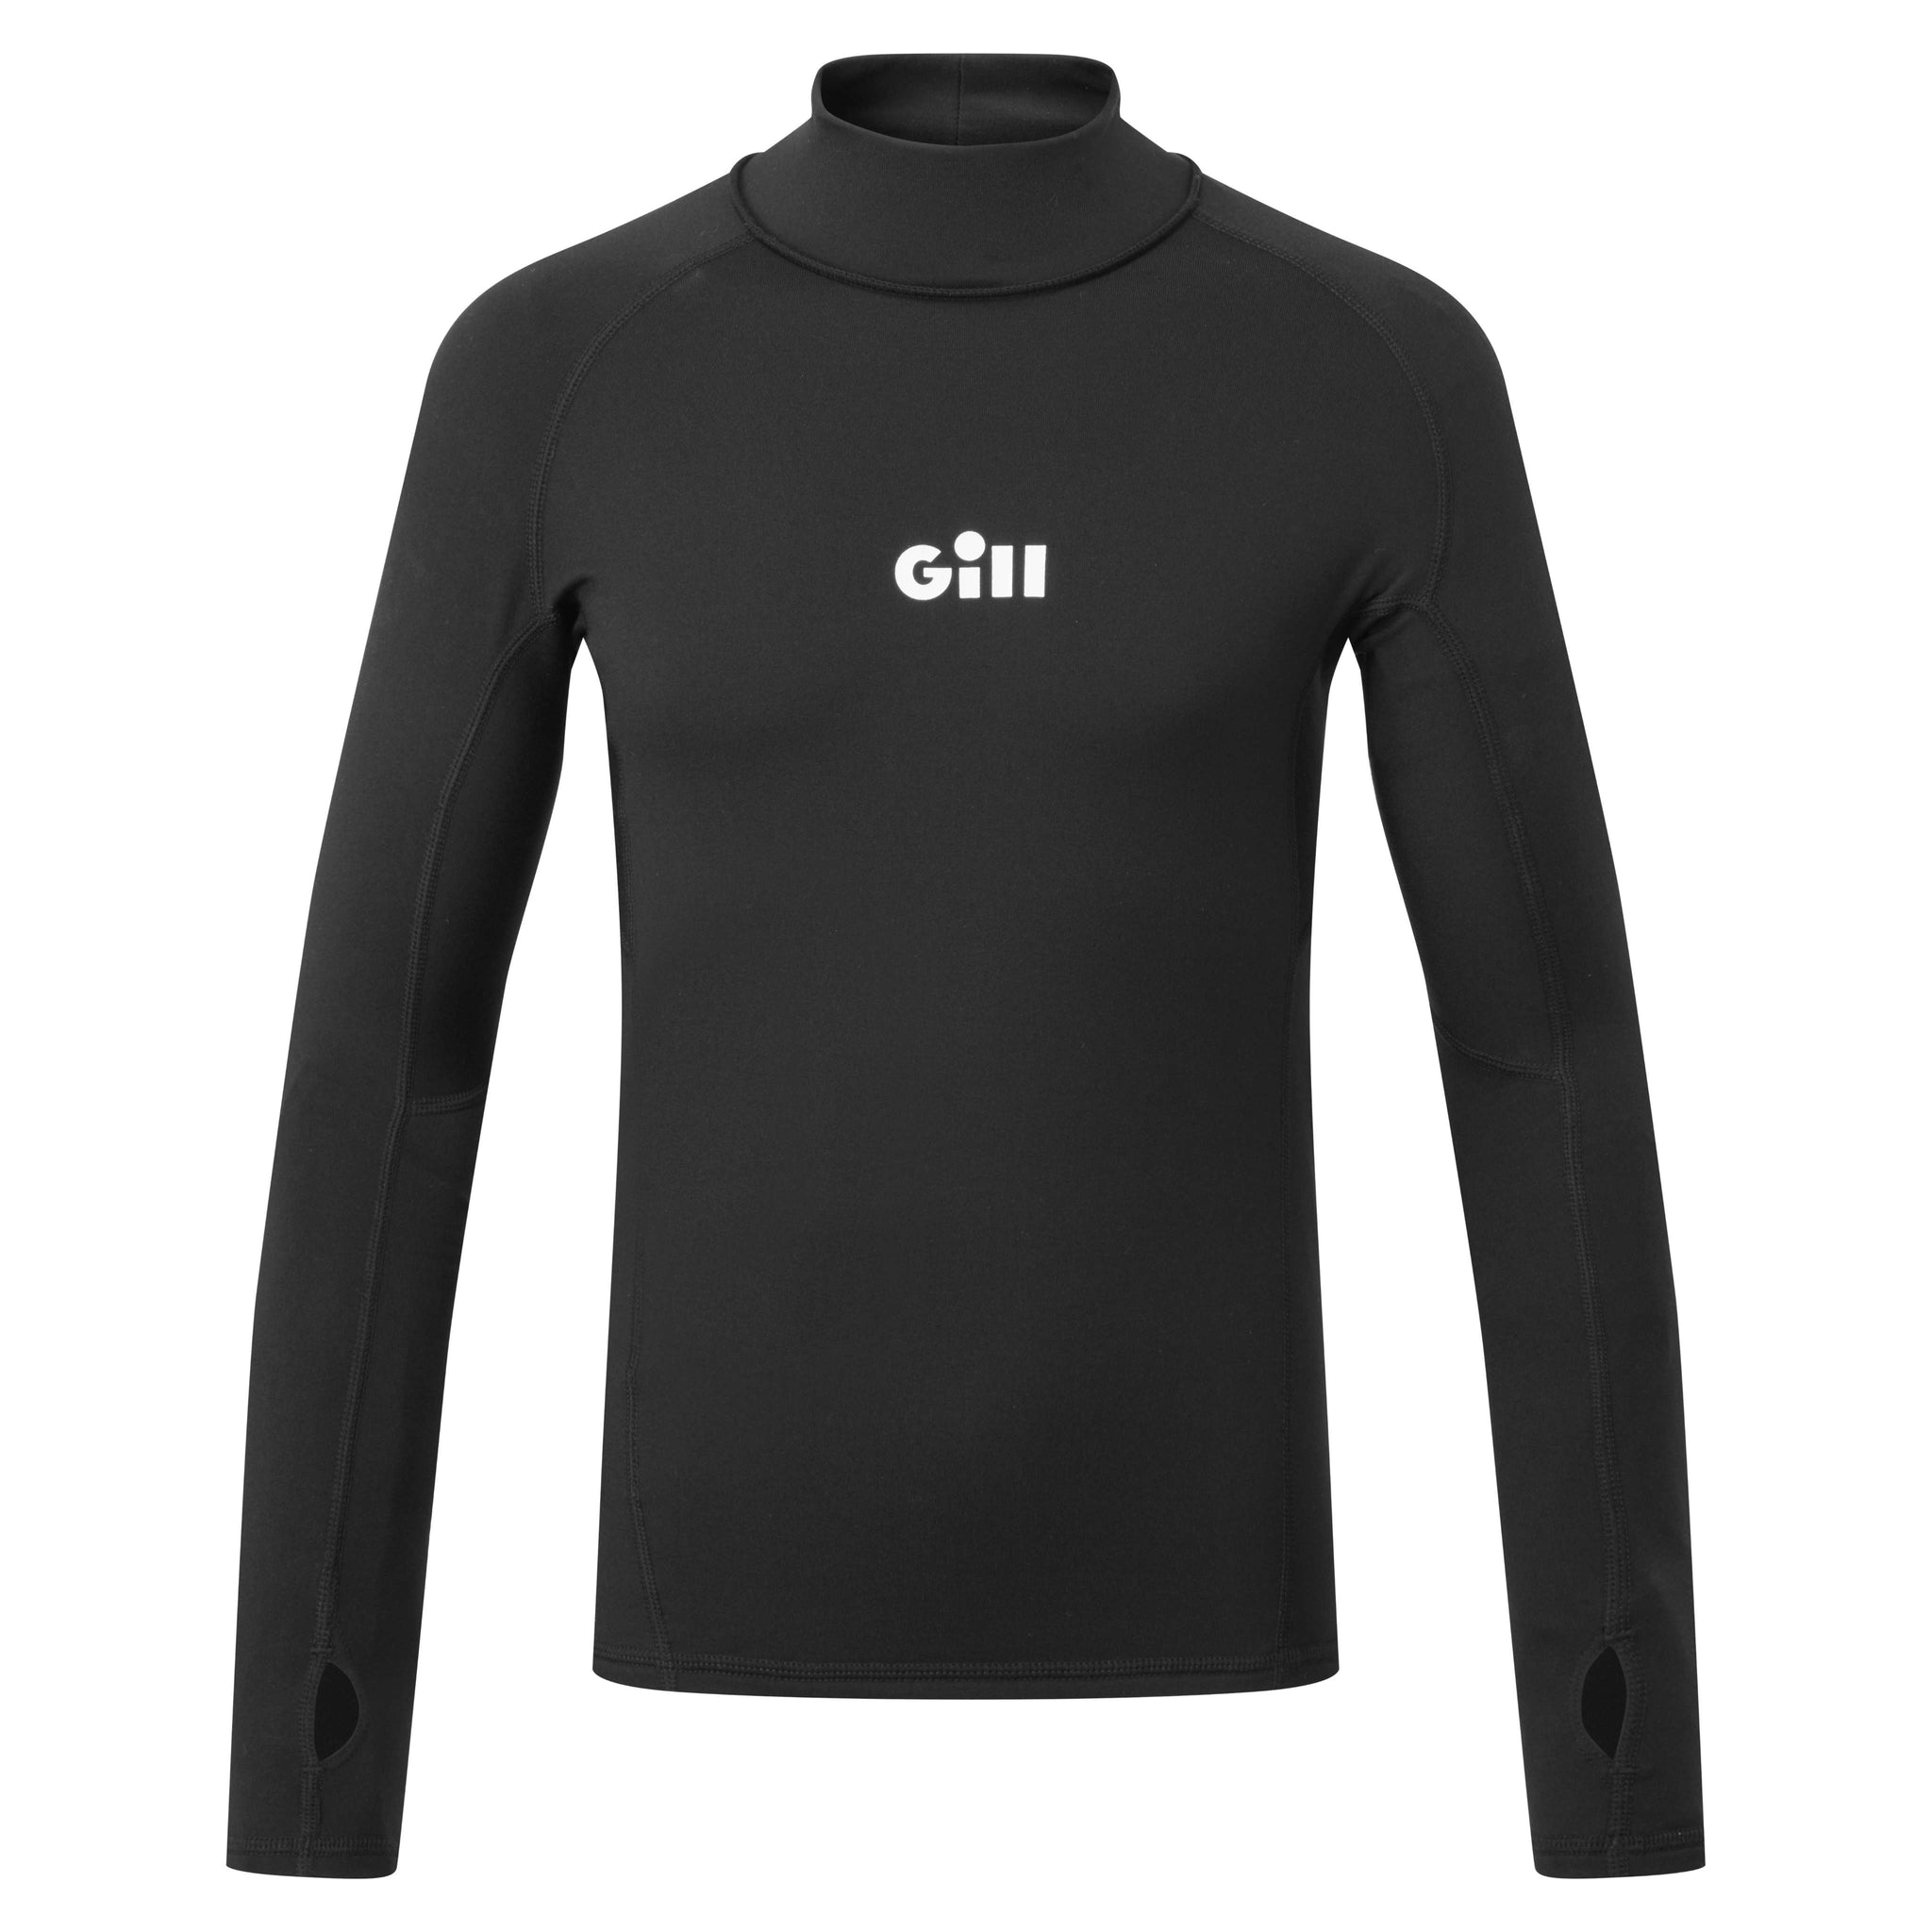 Gill - Hydrophobe Thermal Top